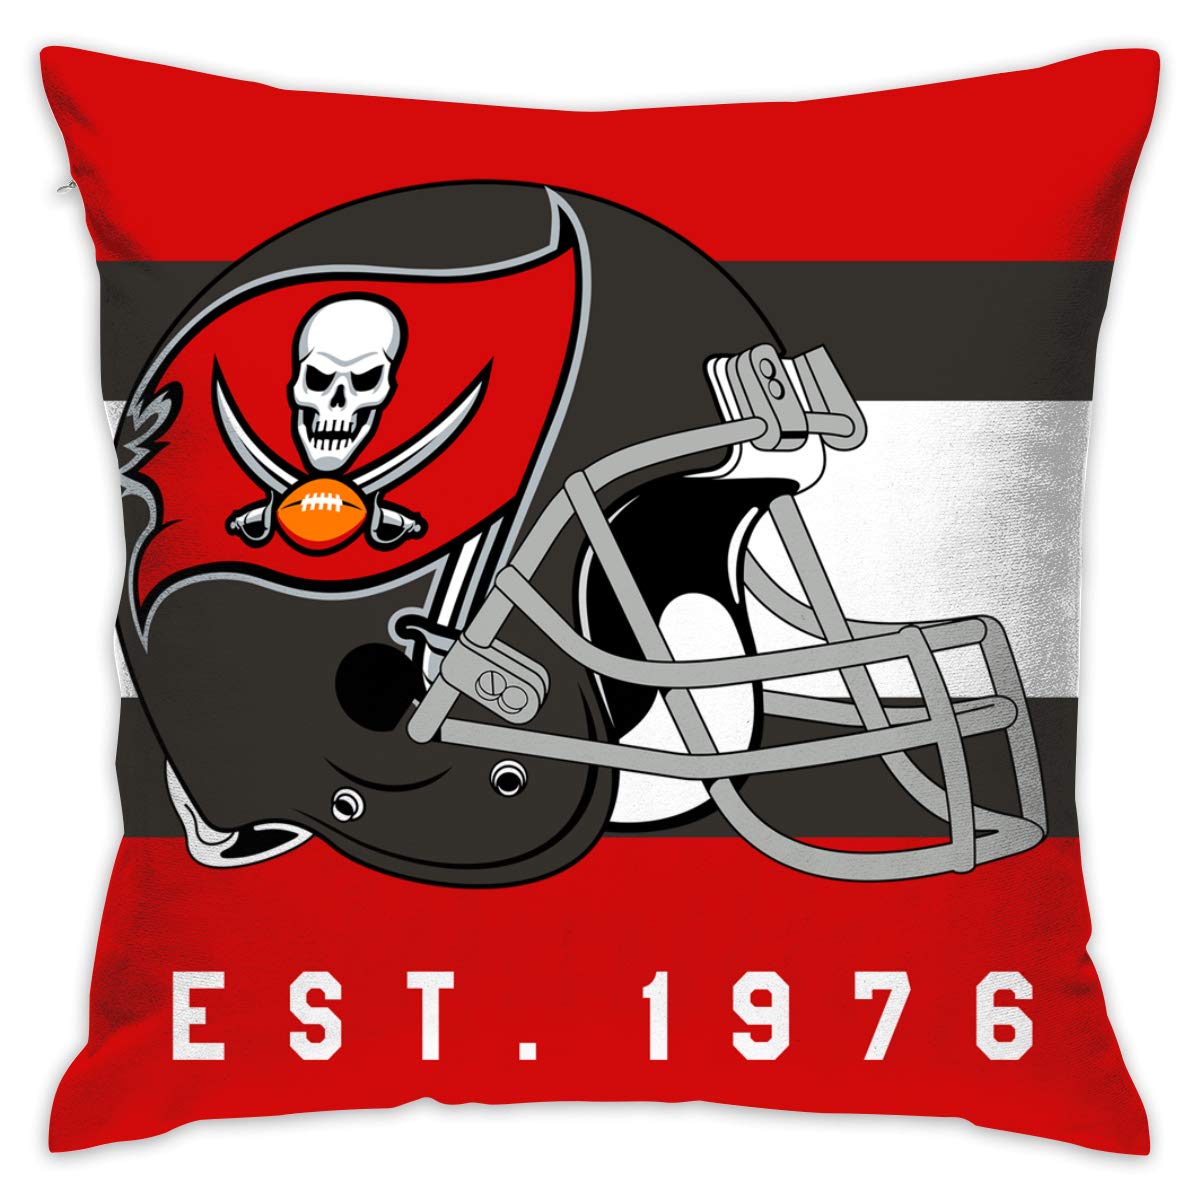 Personalized Football Tampa Bay Buccaneers Design Pillowcase Decorative Throw Pillow Cover